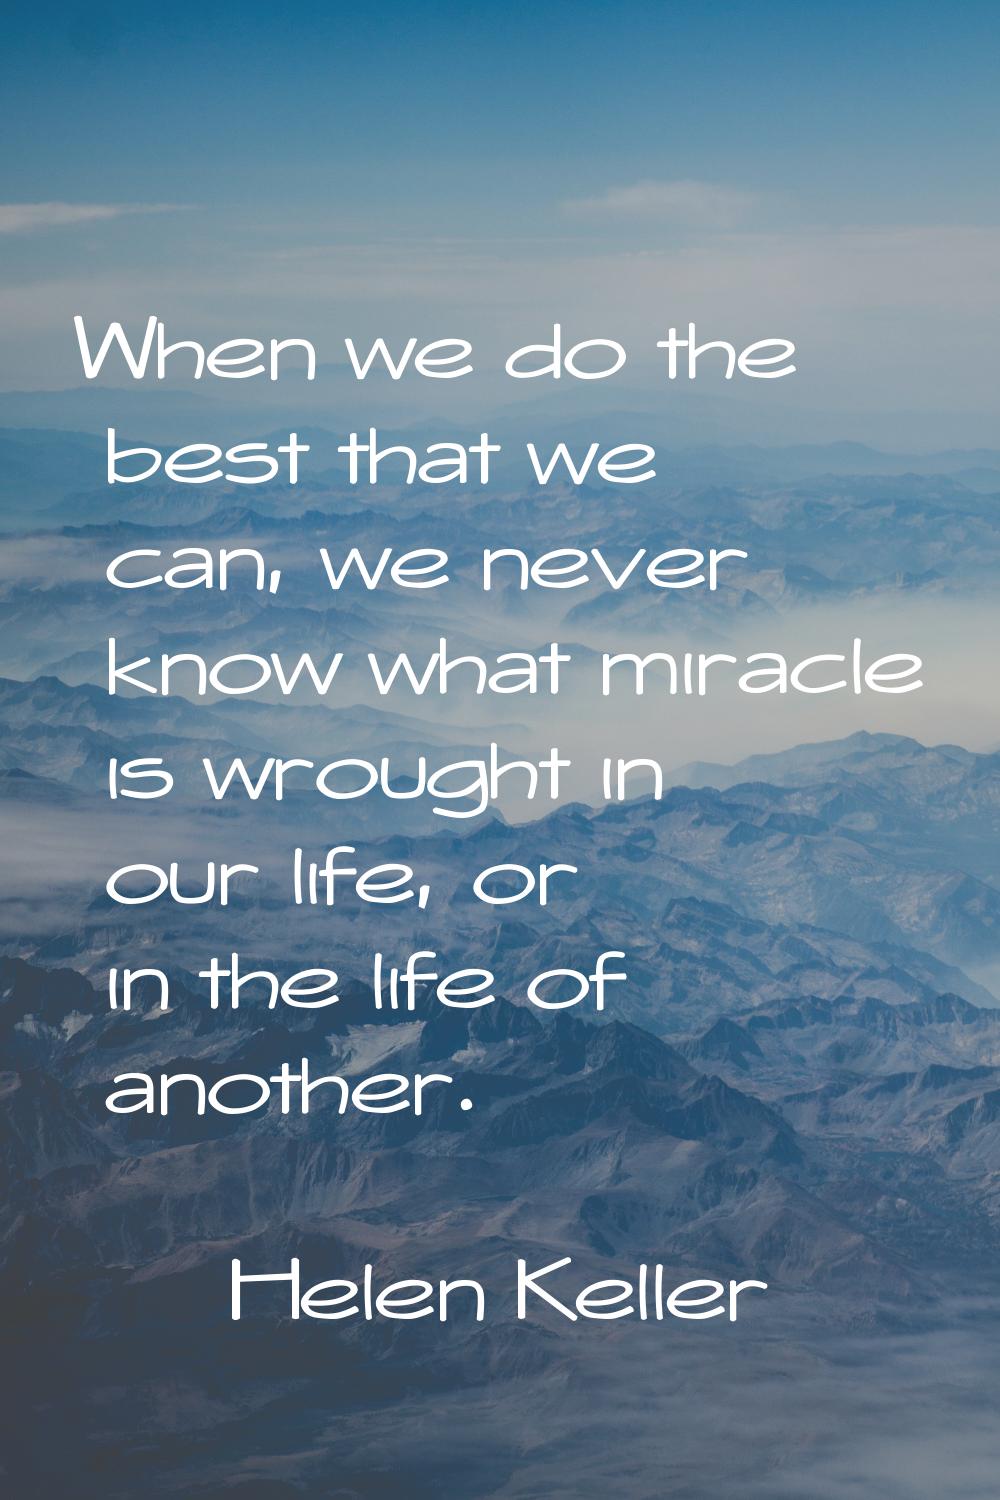 When we do the best that we can, we never know what miracle is wrought in our life, or in the life 